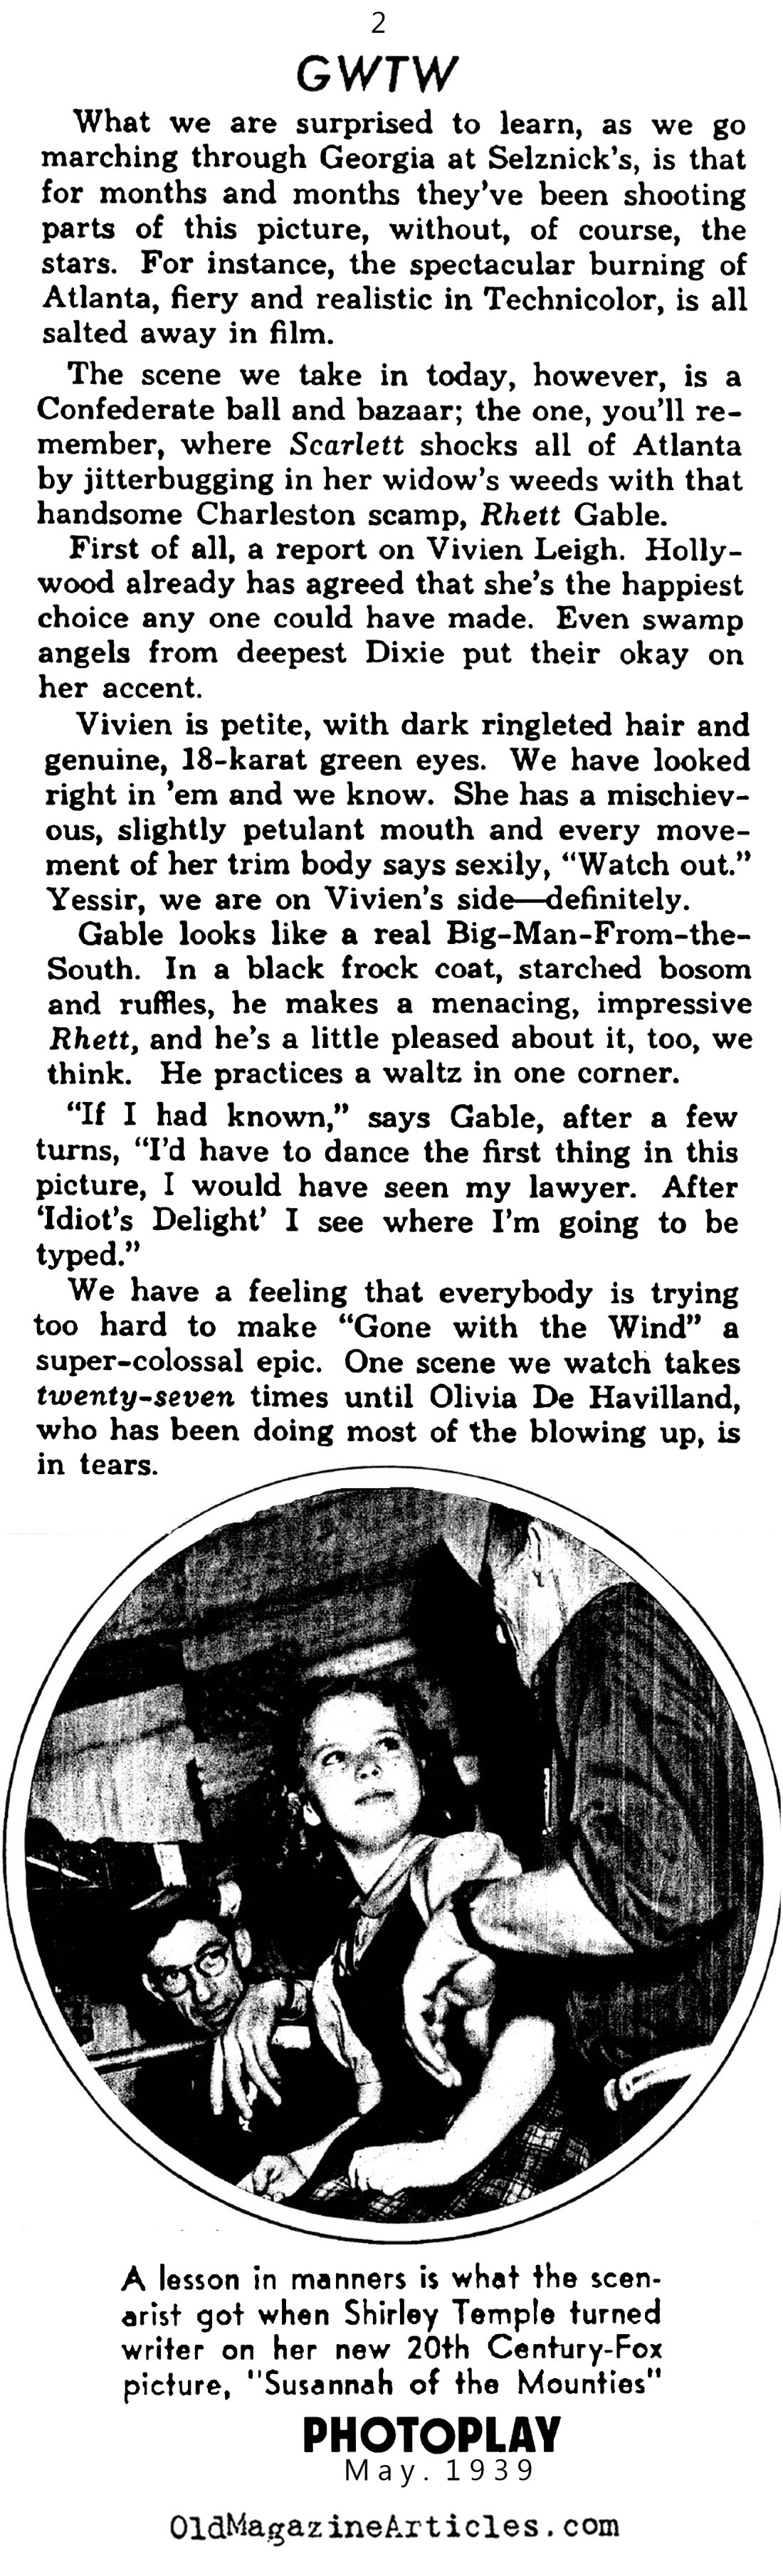 Gone with Wind Begins Shooting (Photoplay Magazine, 1939)